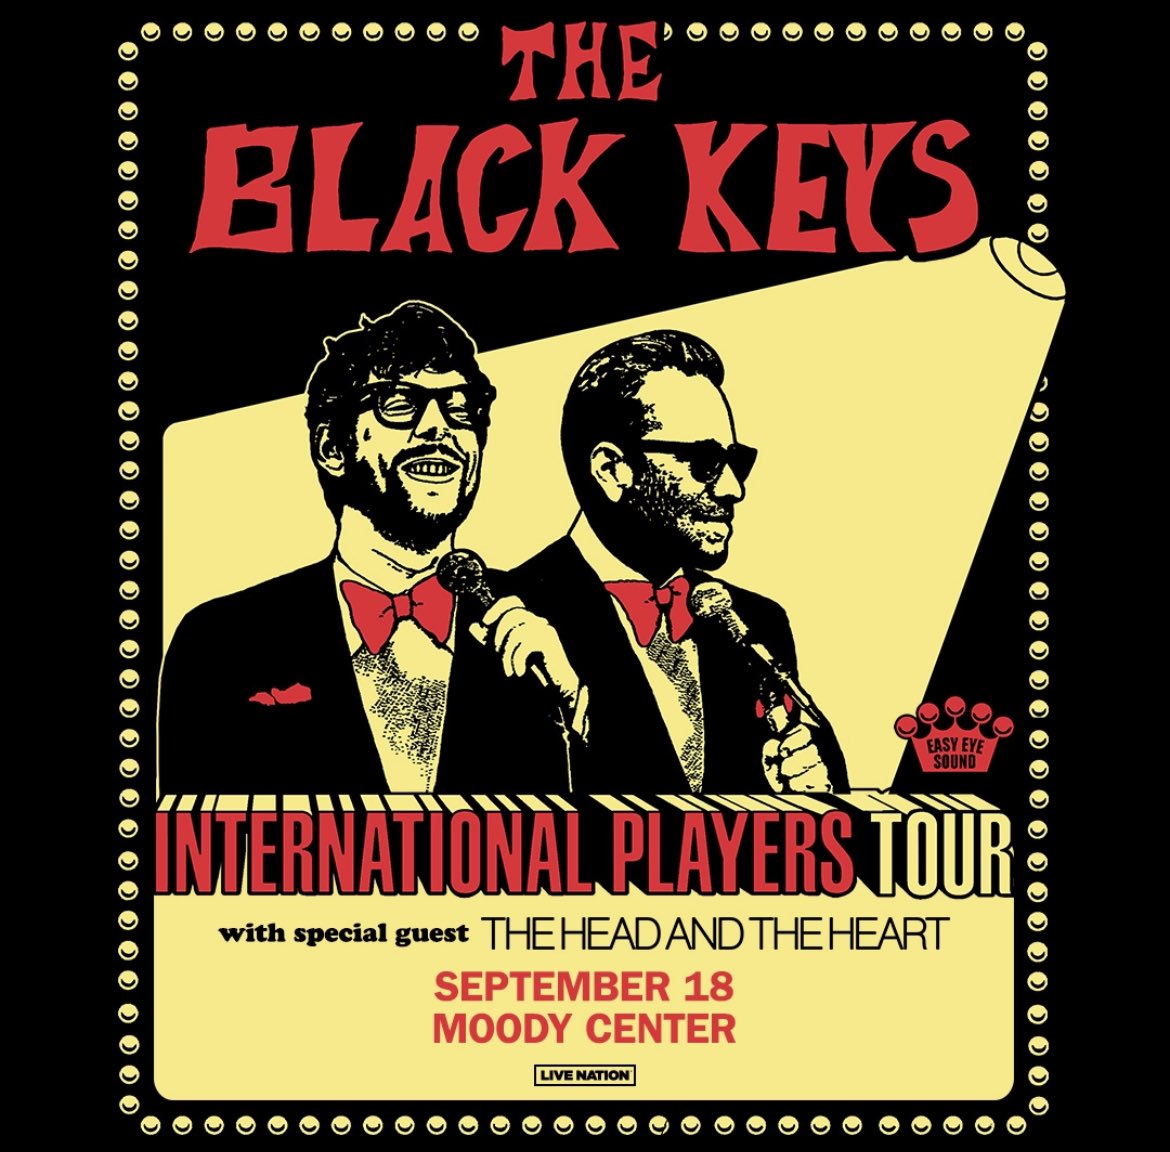 JUST IN: @theblackkeys are returning to @MoodyCenterATX on the International Players Tour with special guest @headandtheheart on September 18! Presale: Thurs, 4/4 at 10am (Code: BARTONSPRINGS) Onsale: Fri, 4/5 at 10am atxconcert.com